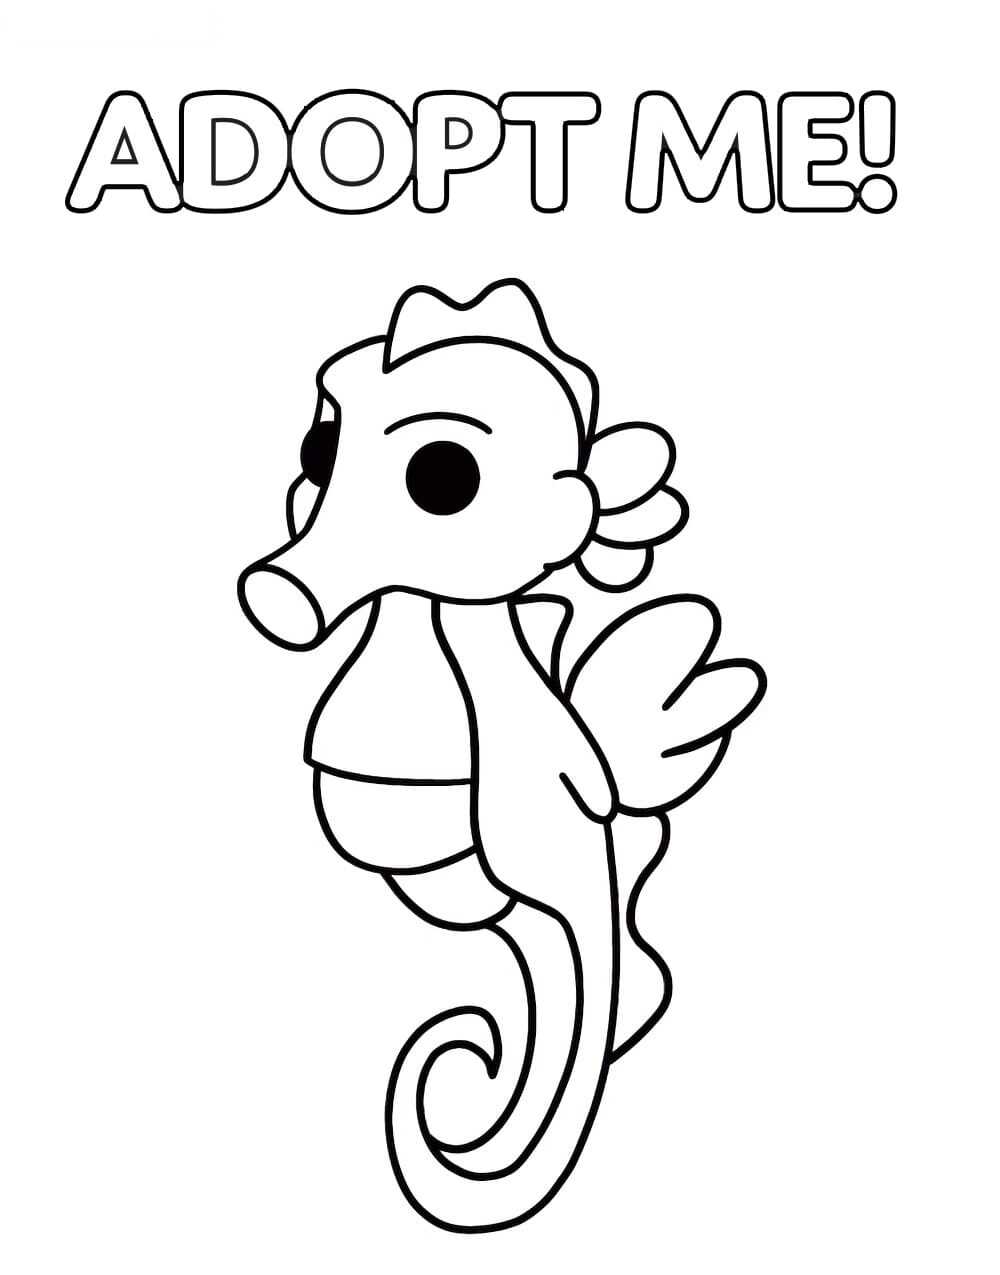 Seahorse From Adopt Me Has Elongated Snout And Its Tail Curves Towards Its Body Coloring Pages Adopt Me Coloring Pages Coloring Pages For Kids And Adults - roblox adopt me pets coloring pages